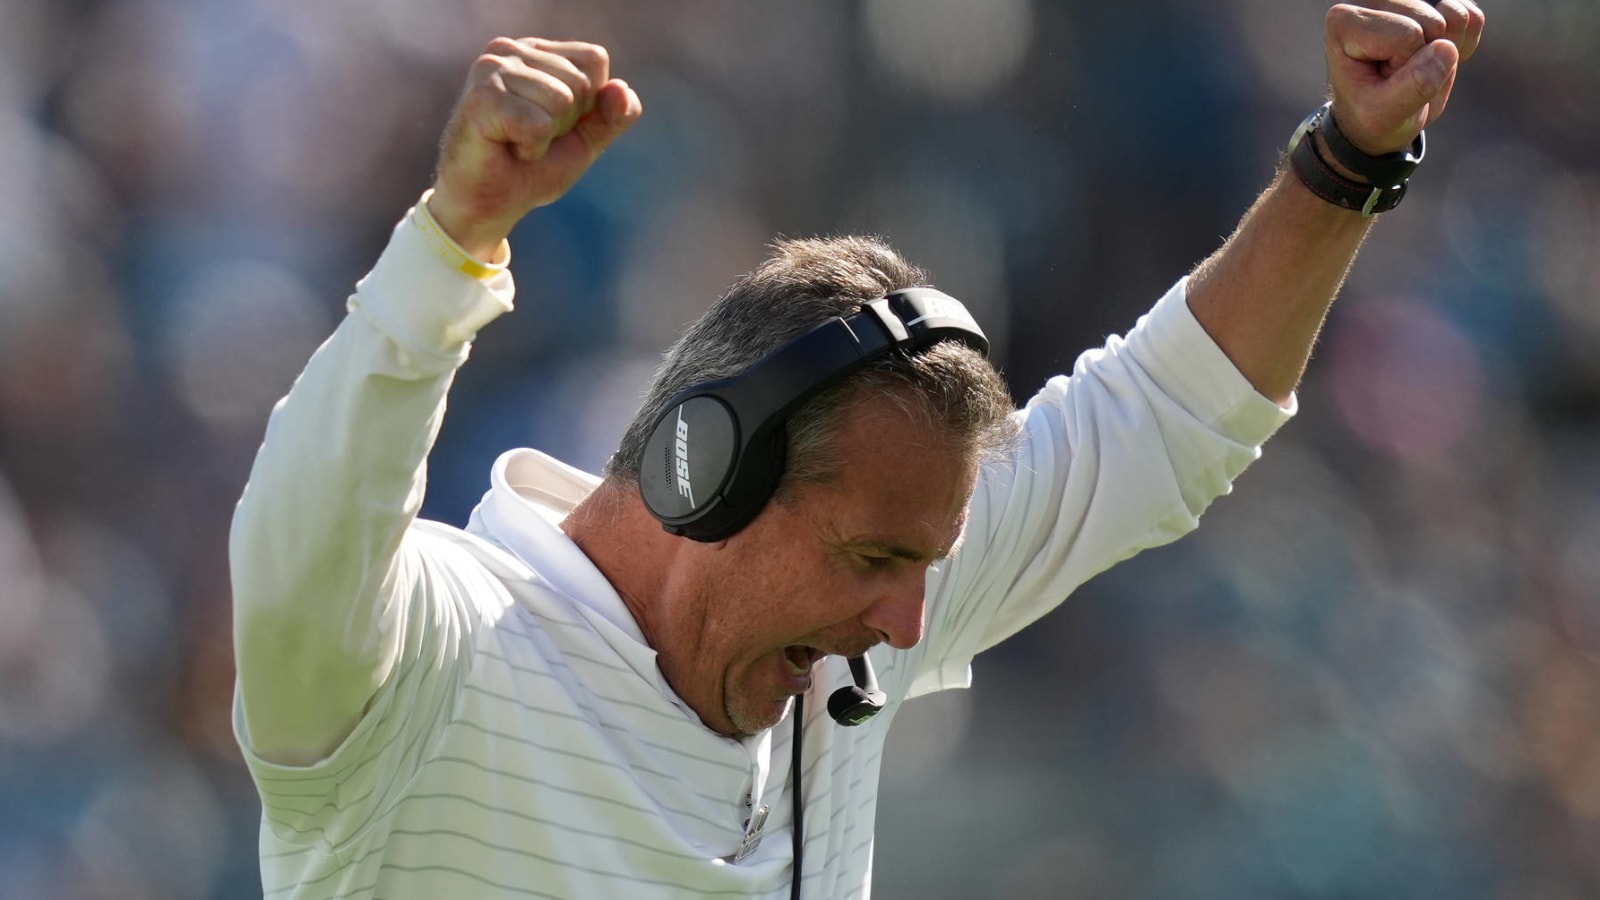 Twitter reacts to Urban Meyer getting first NFL win